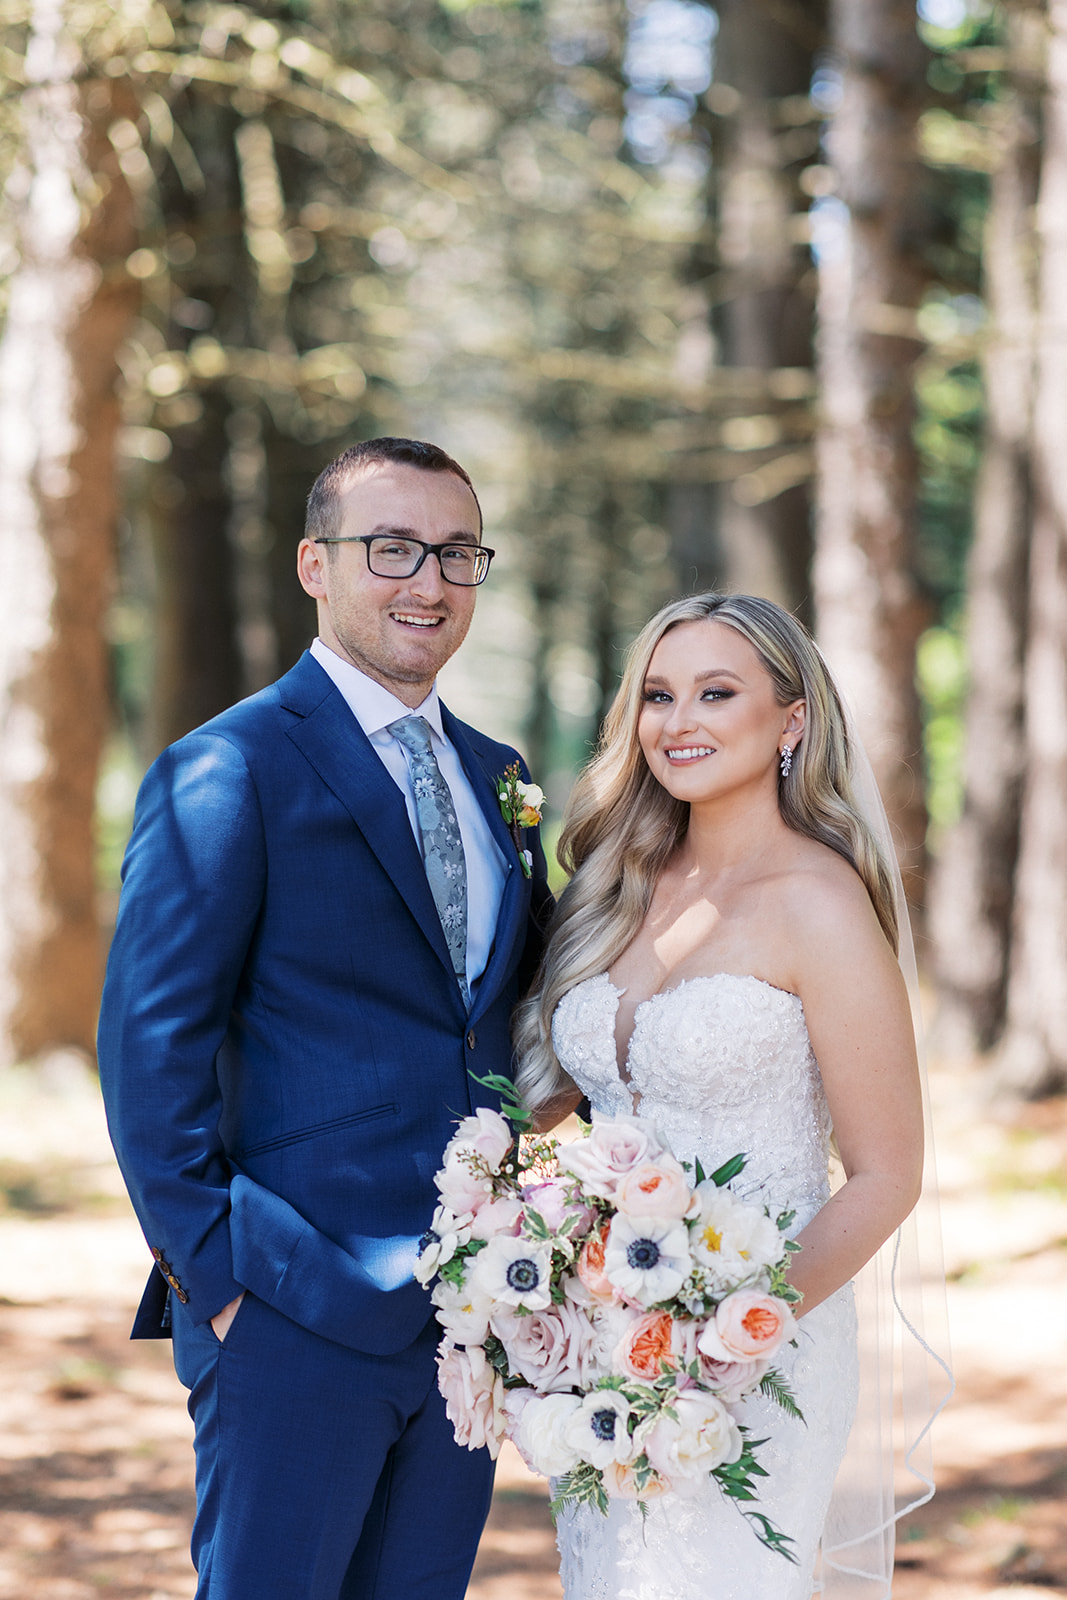 Newlyweds stand together and smile in a forest at their wedding